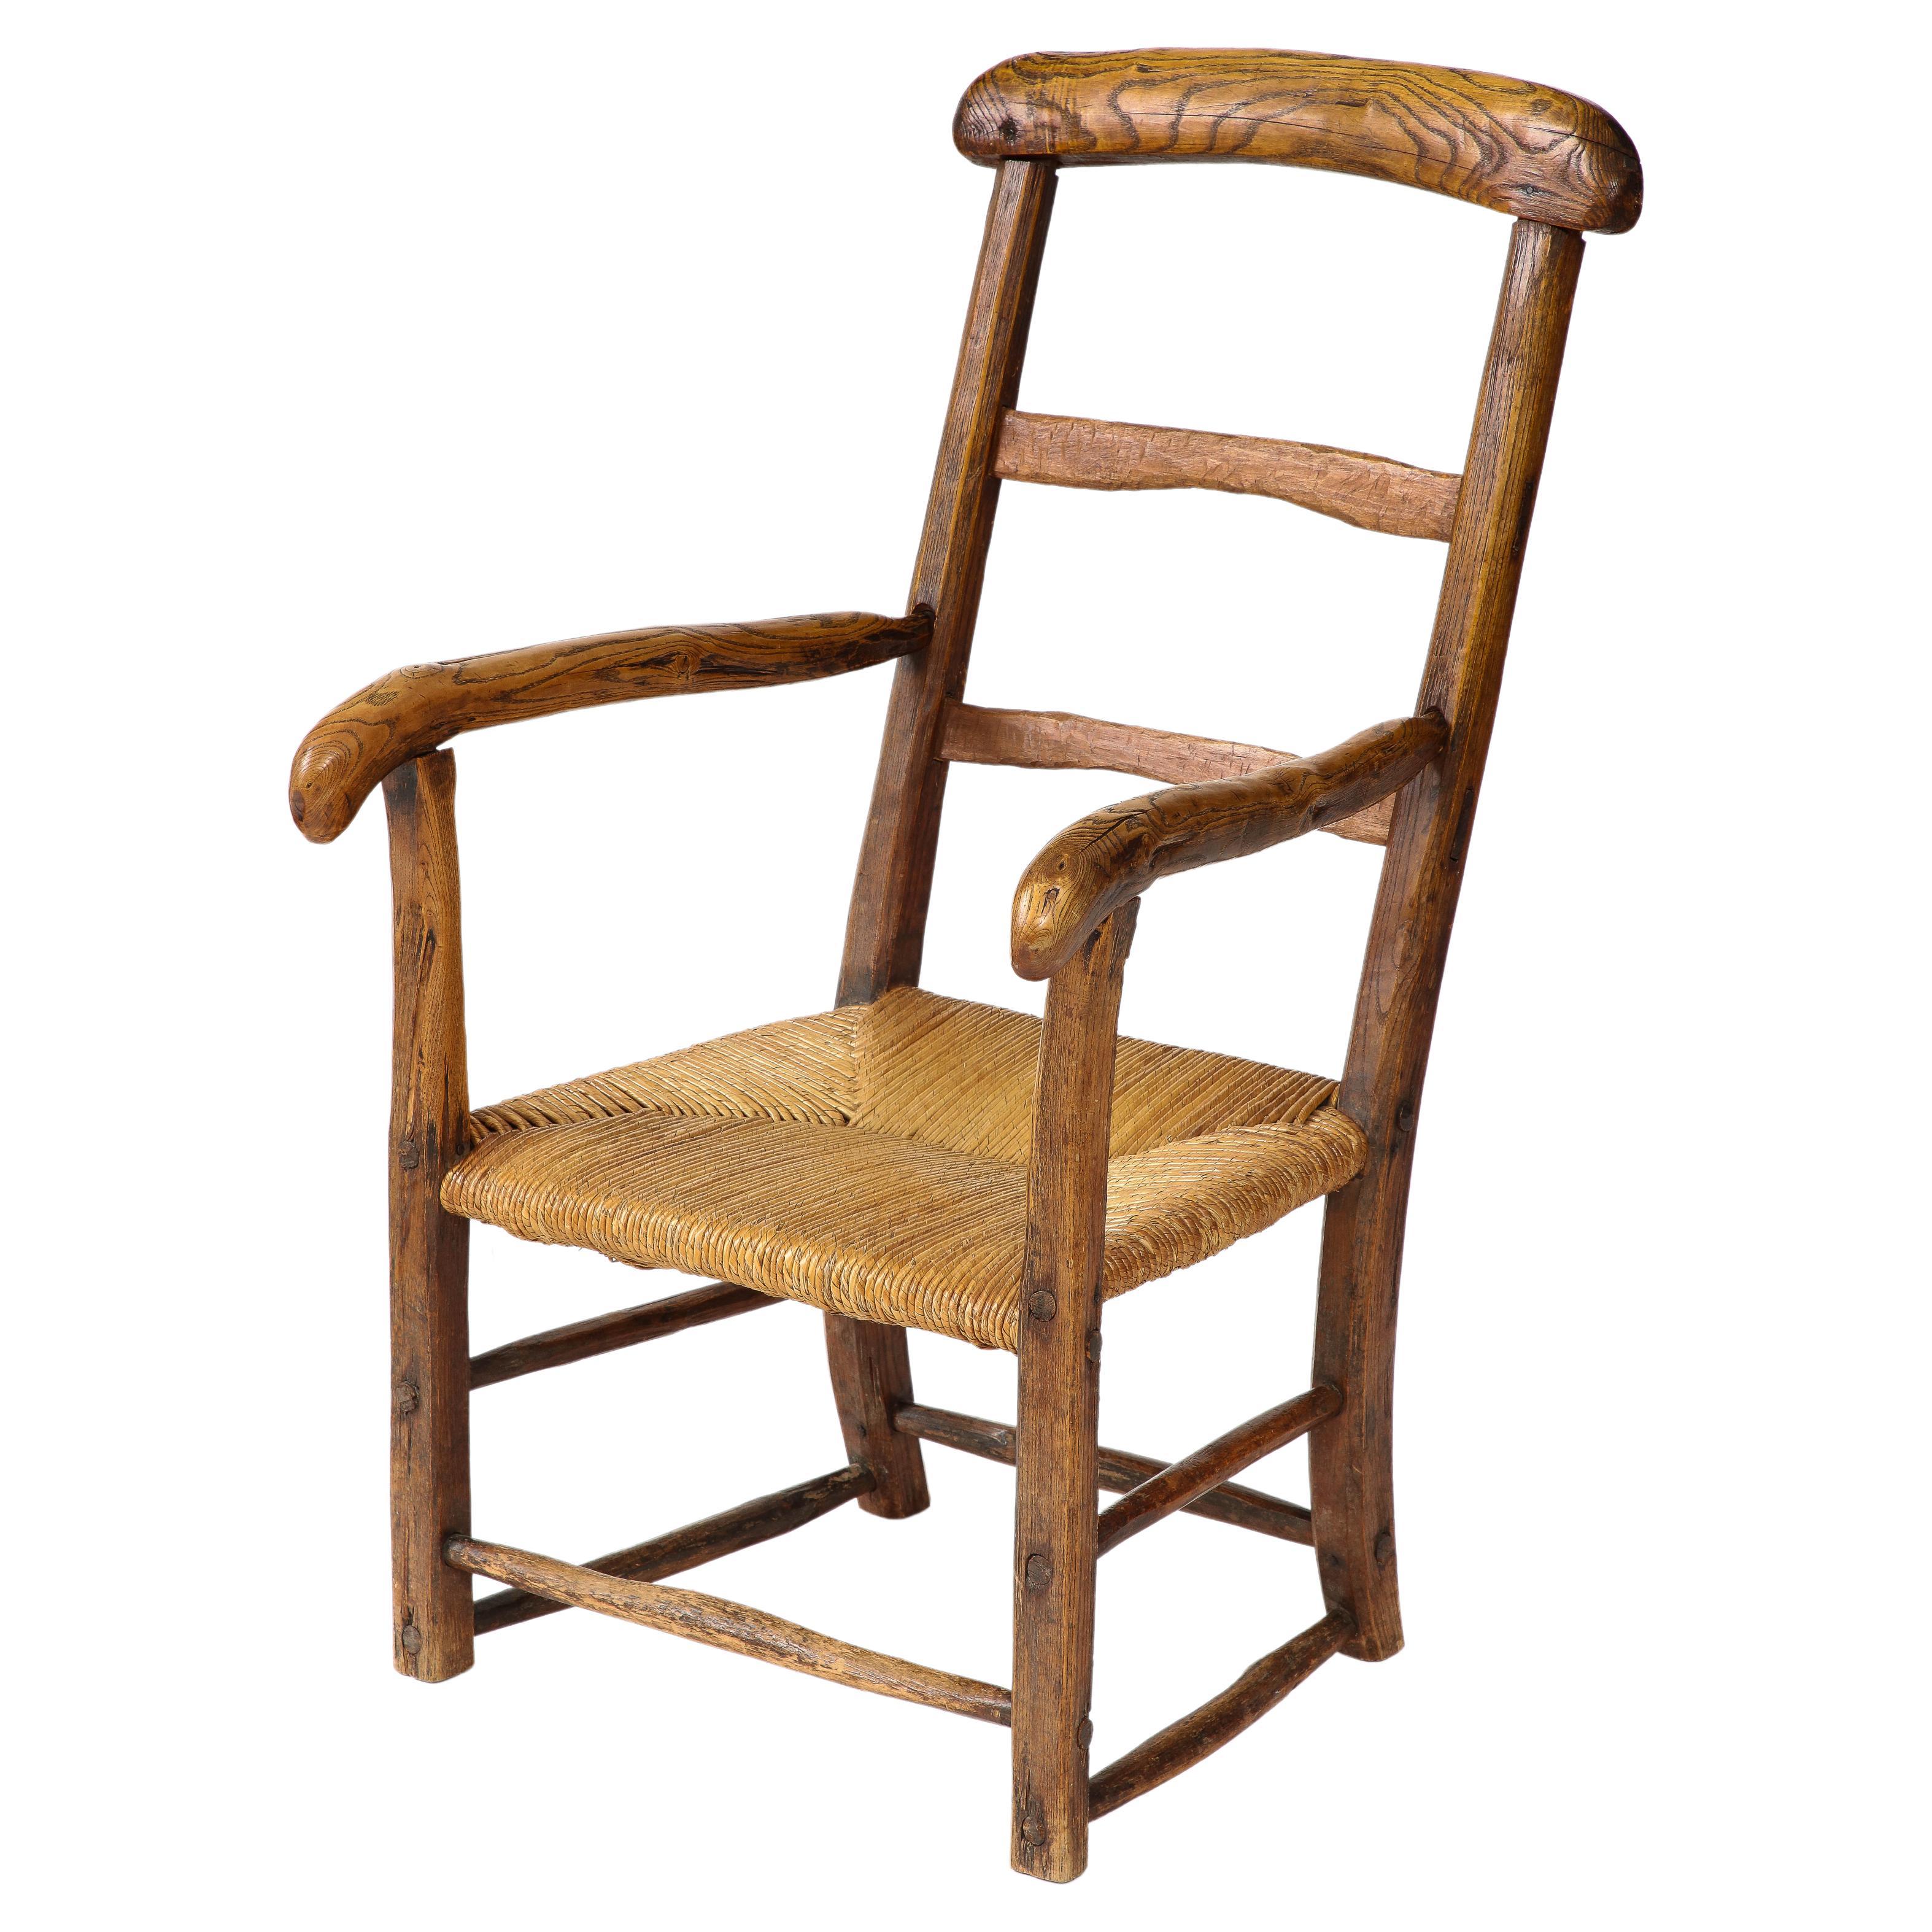 19th Century Rustic French Chair with Straw Seat For Sale